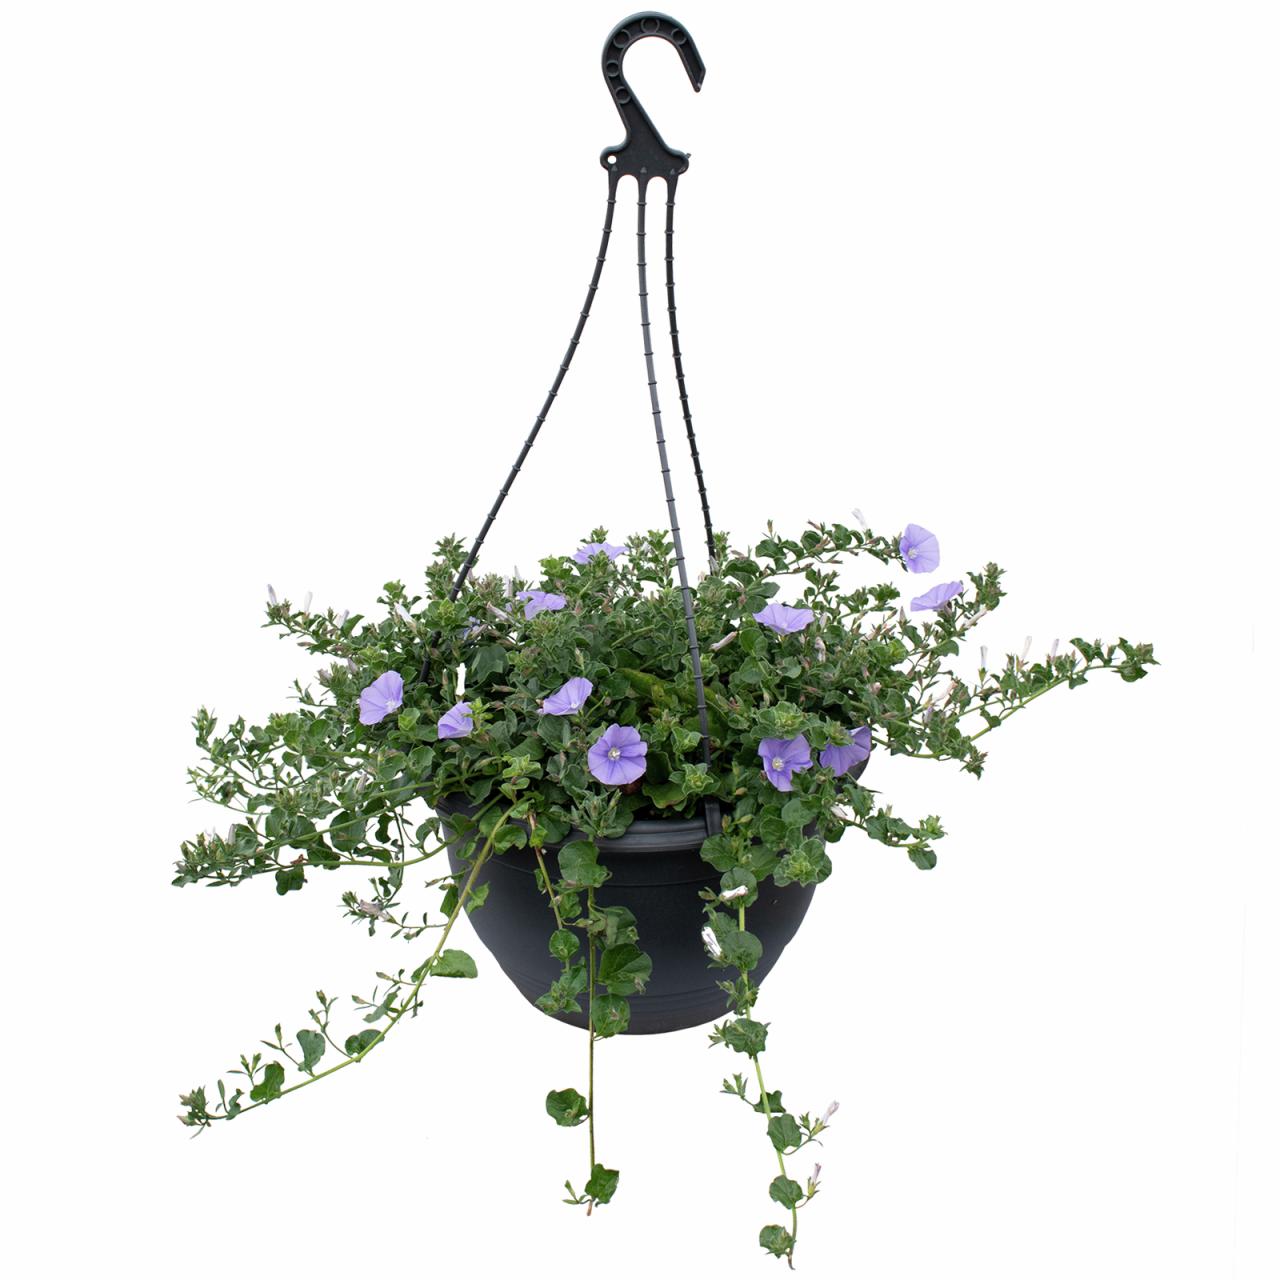 Hanging Plants Indoor | Plant Basket Bunnings: Your Guide to Selecting and Caring for Stylish Plant Containers